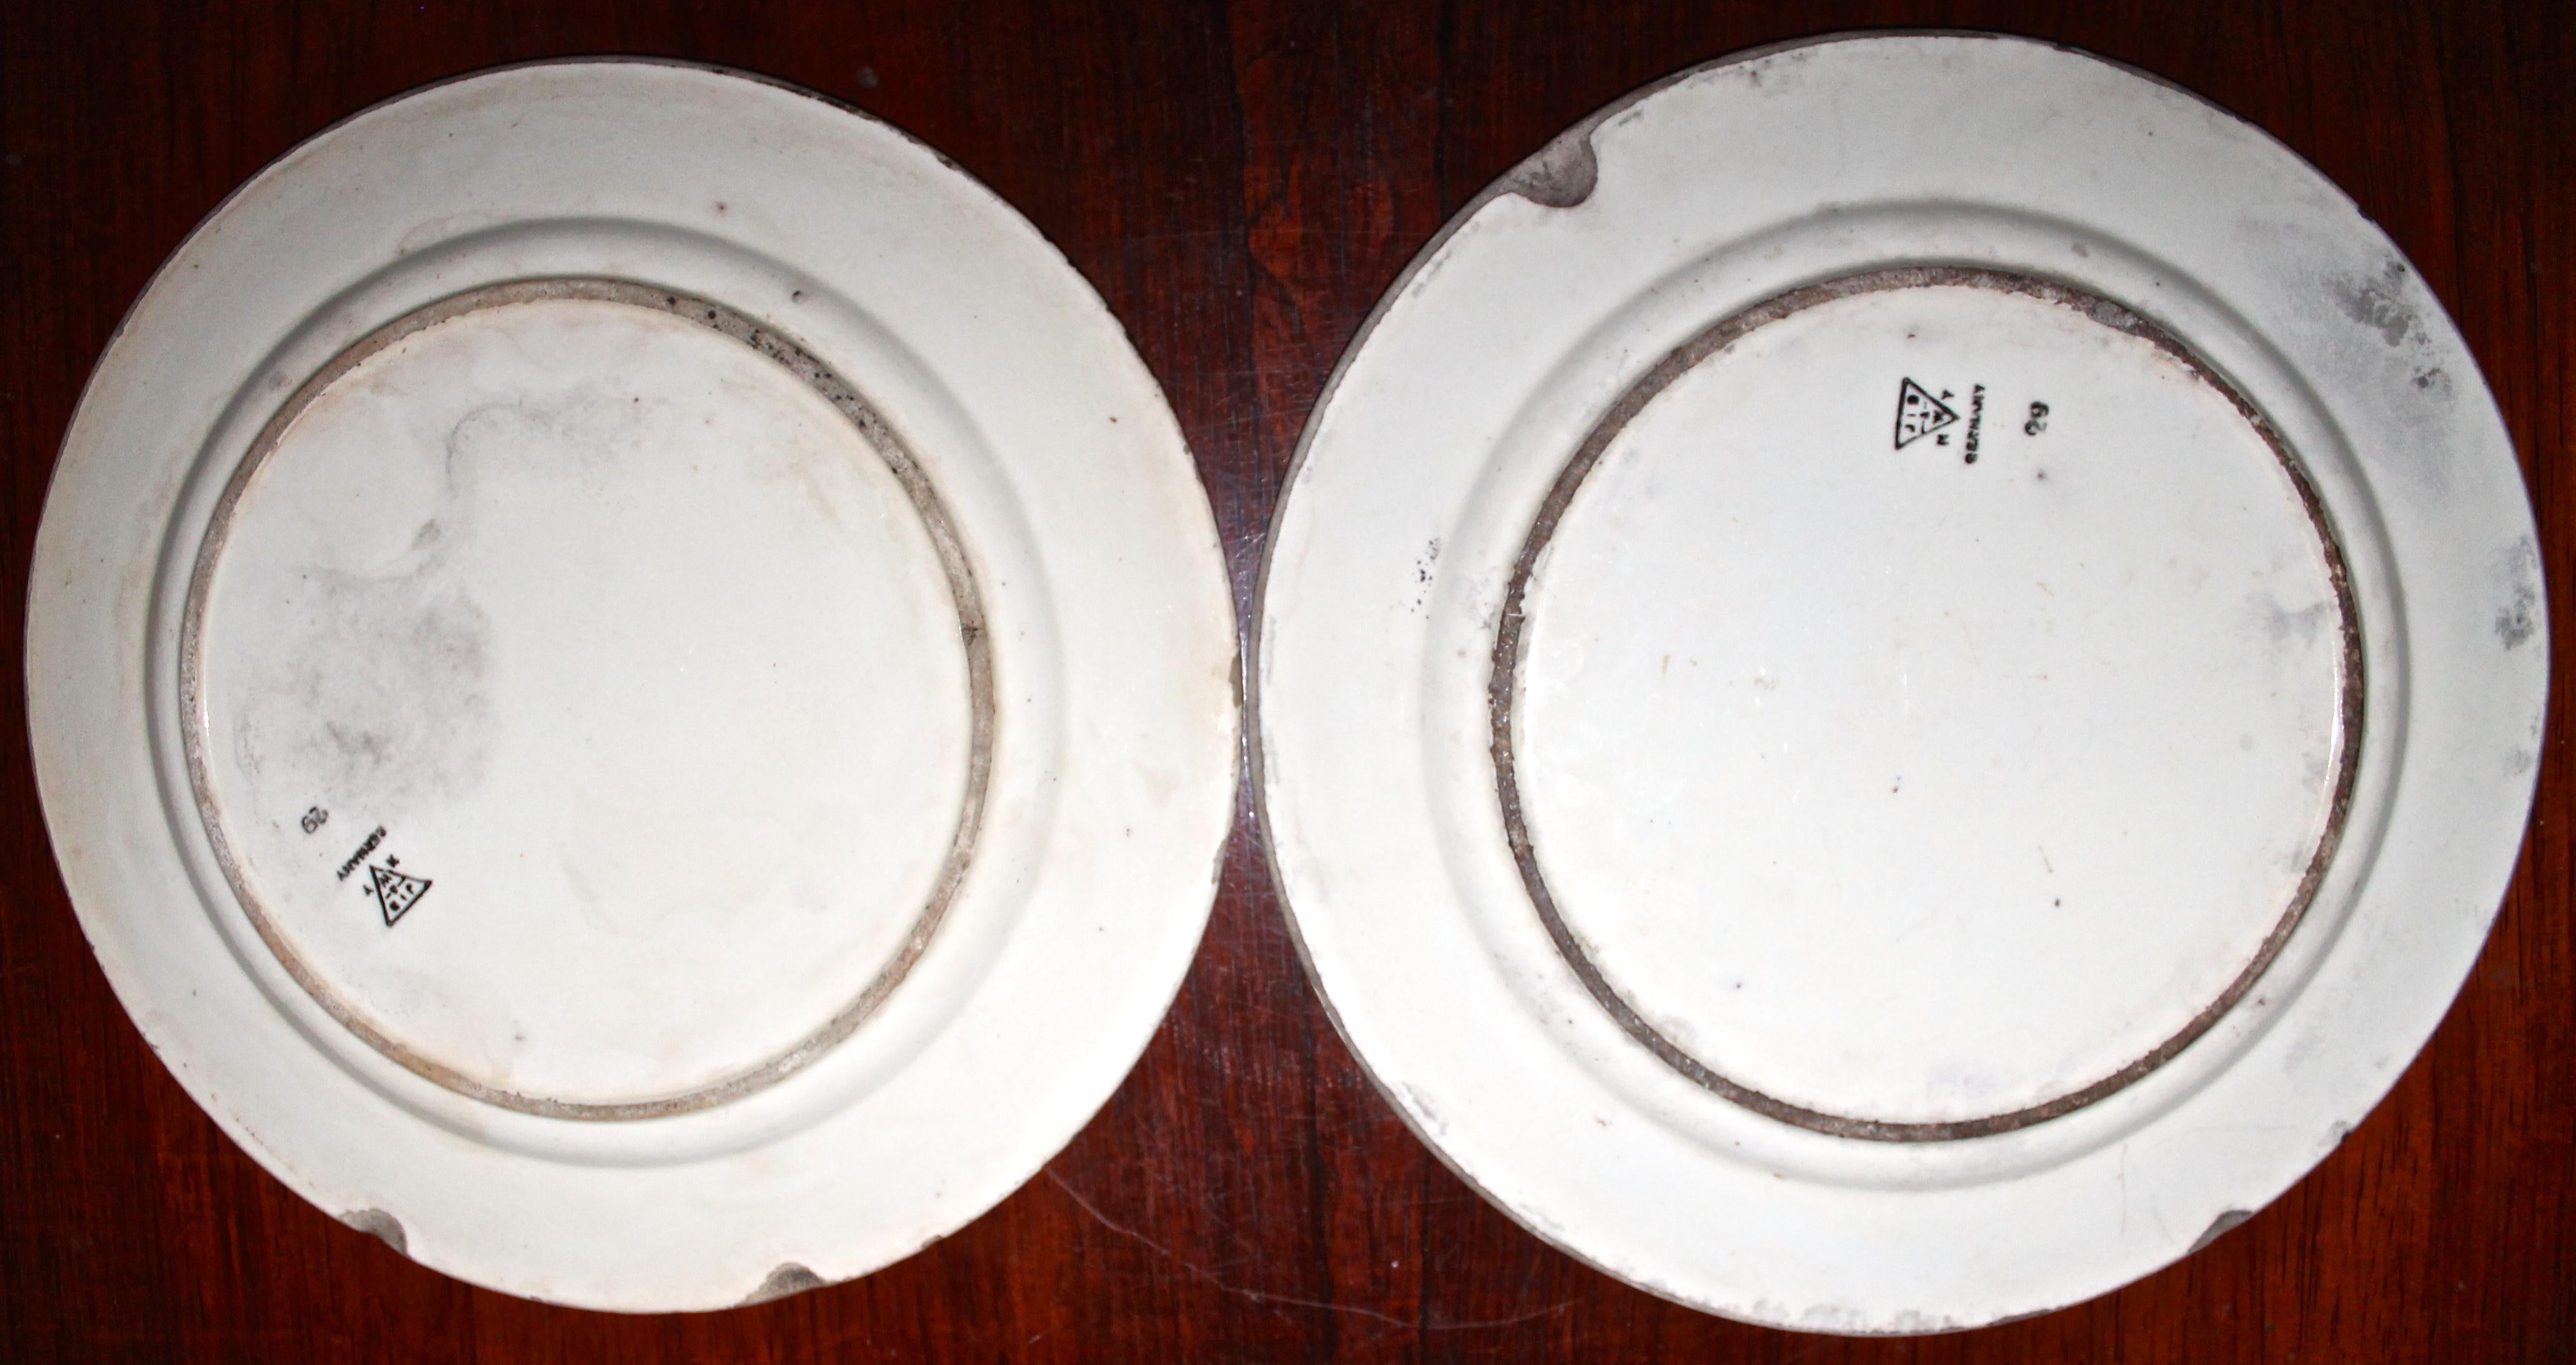 Pair of very rare 'Suprematist' plates produced by Schramberg during the Eva Zeisel era. Stencil decorated in Bauhaus geometric manner. Both signed on bottom.